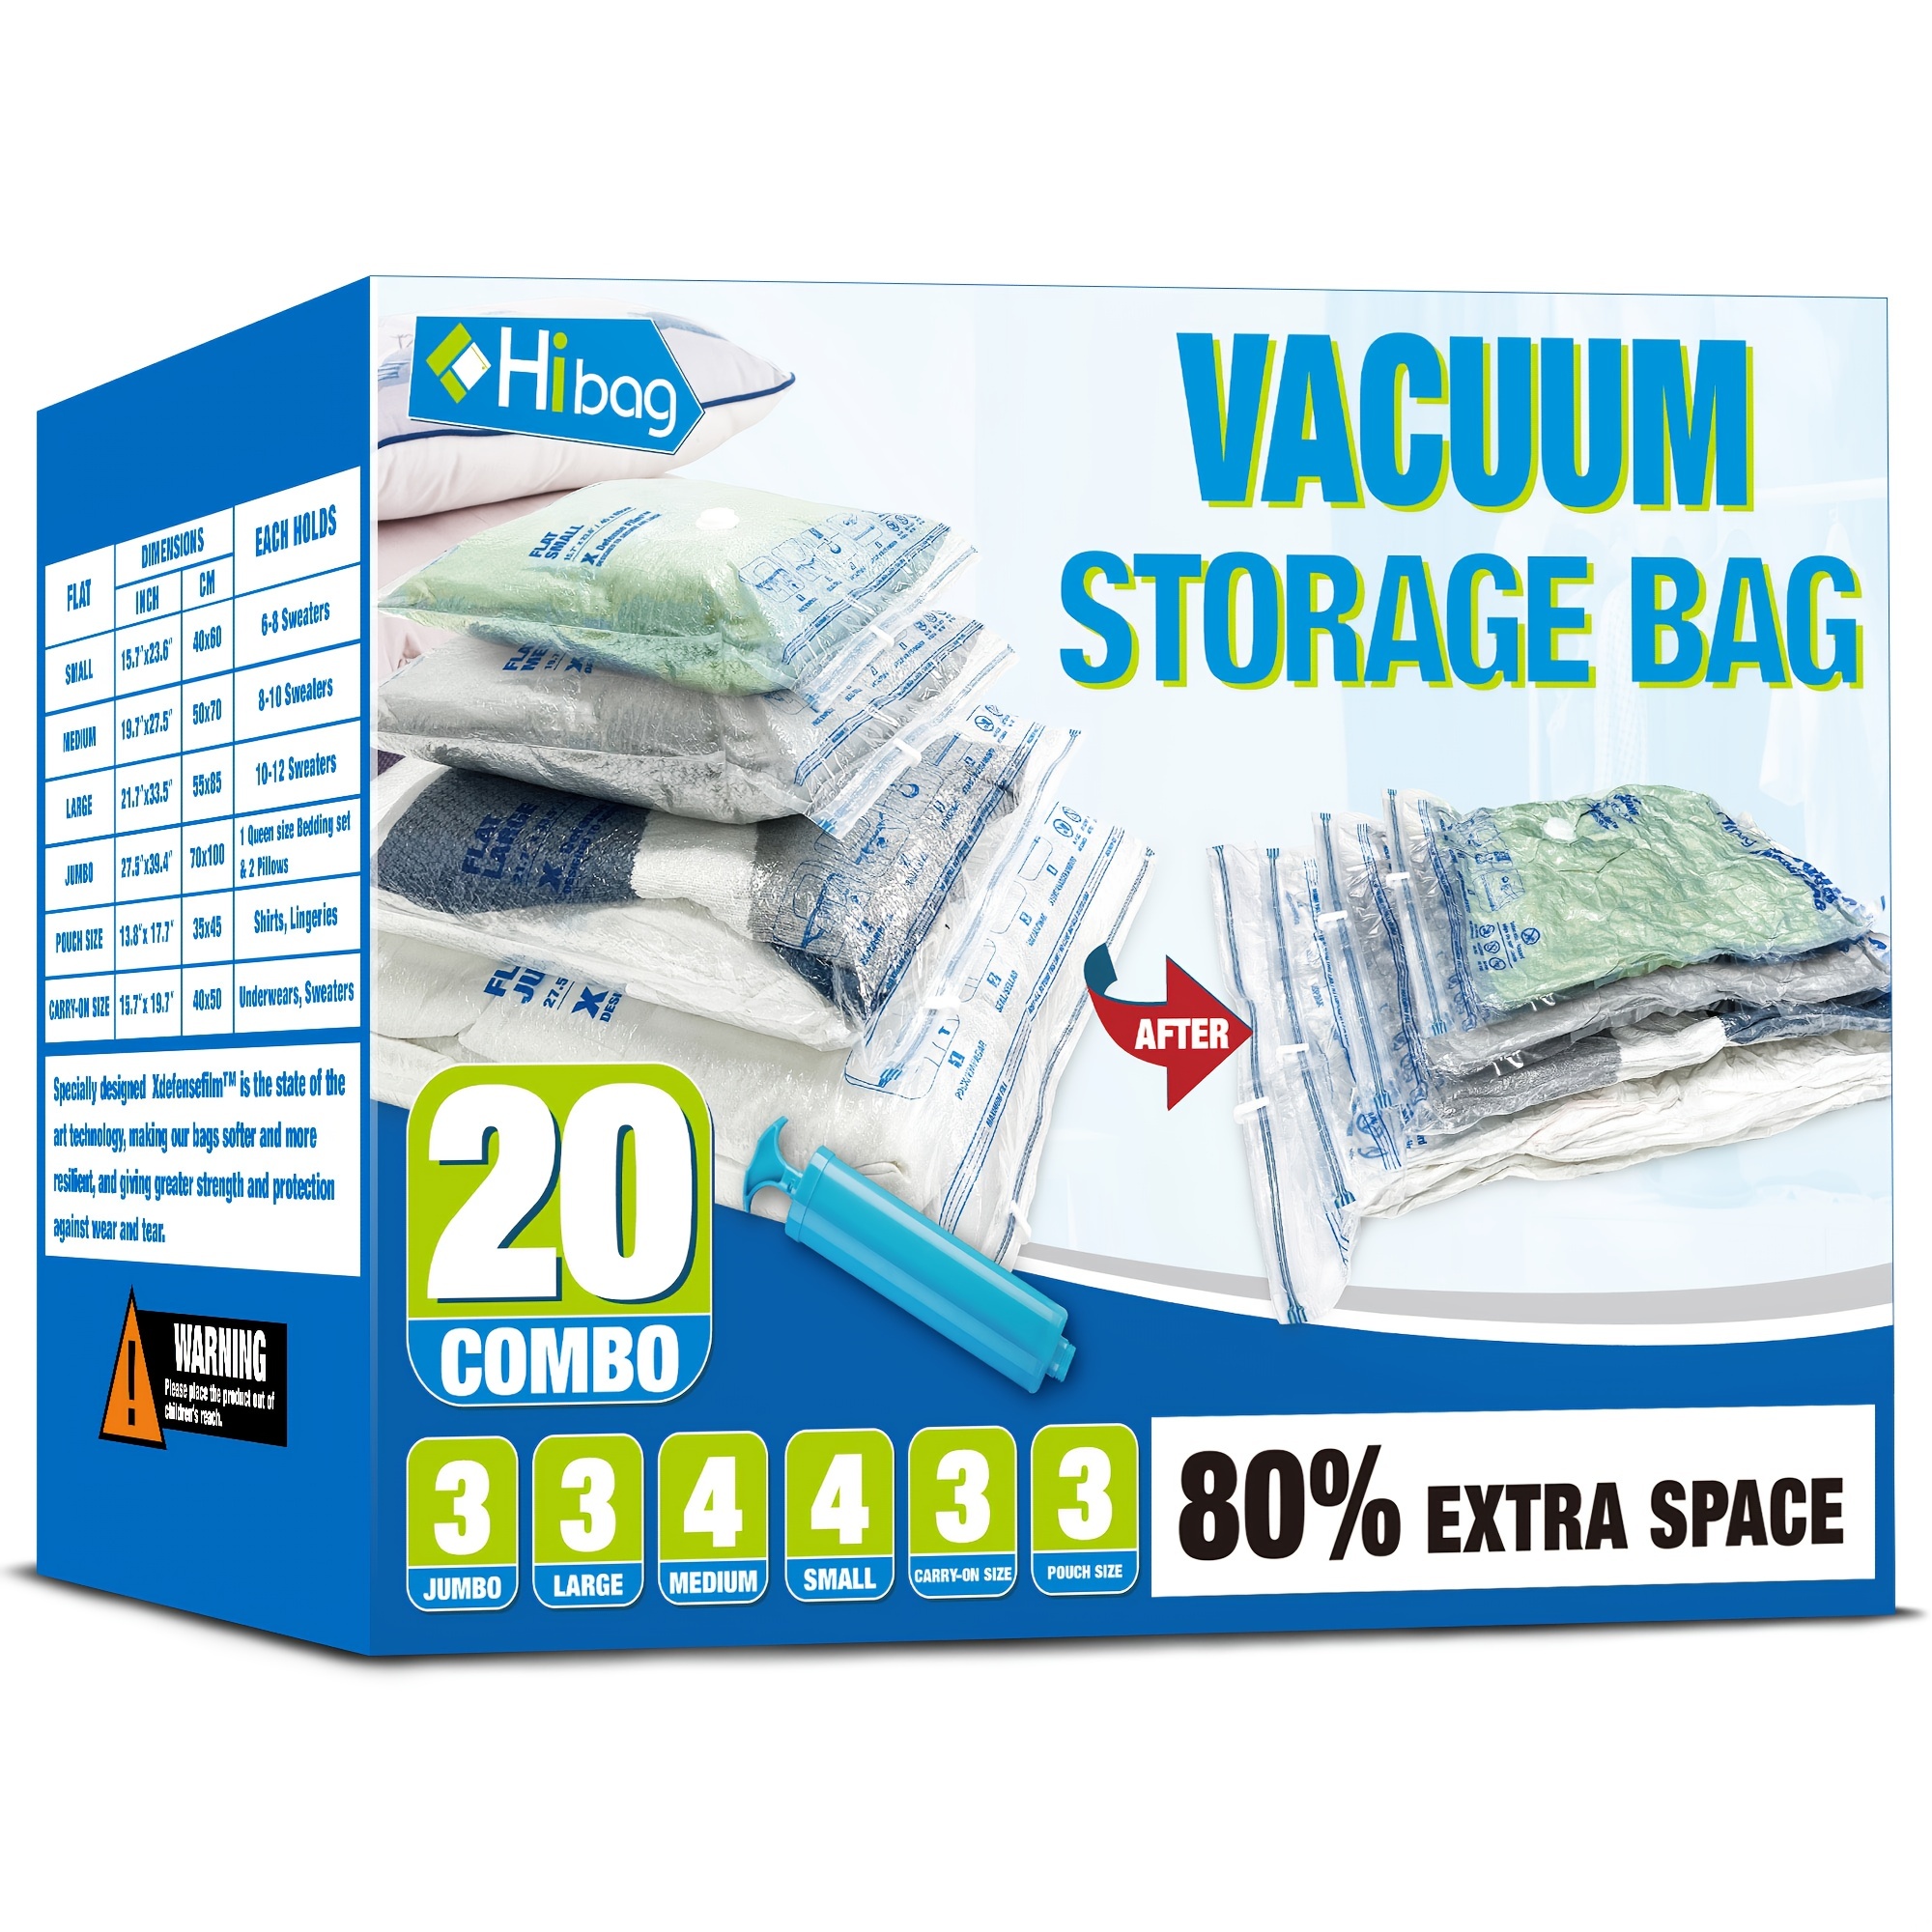 Spacesaver Vacuum Storage Bags (Medium 6 Pack) Save 80% on Clothes Storage  Space - Vacuum Sealer Bags for Comforters, Blankets, Bedding, Clothing 